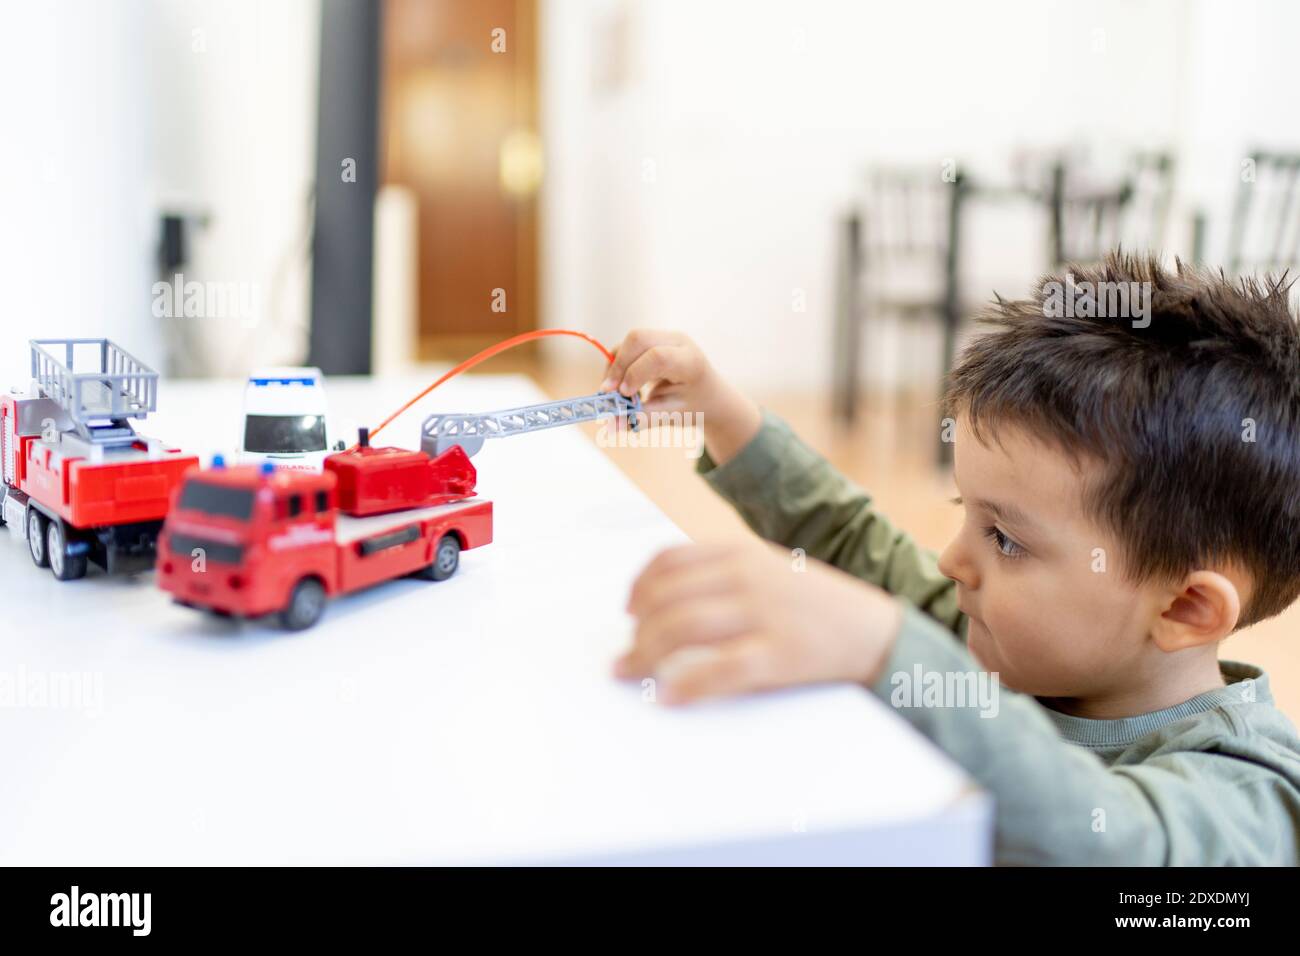 Boy playing with fire engine toy at home Stock Photo